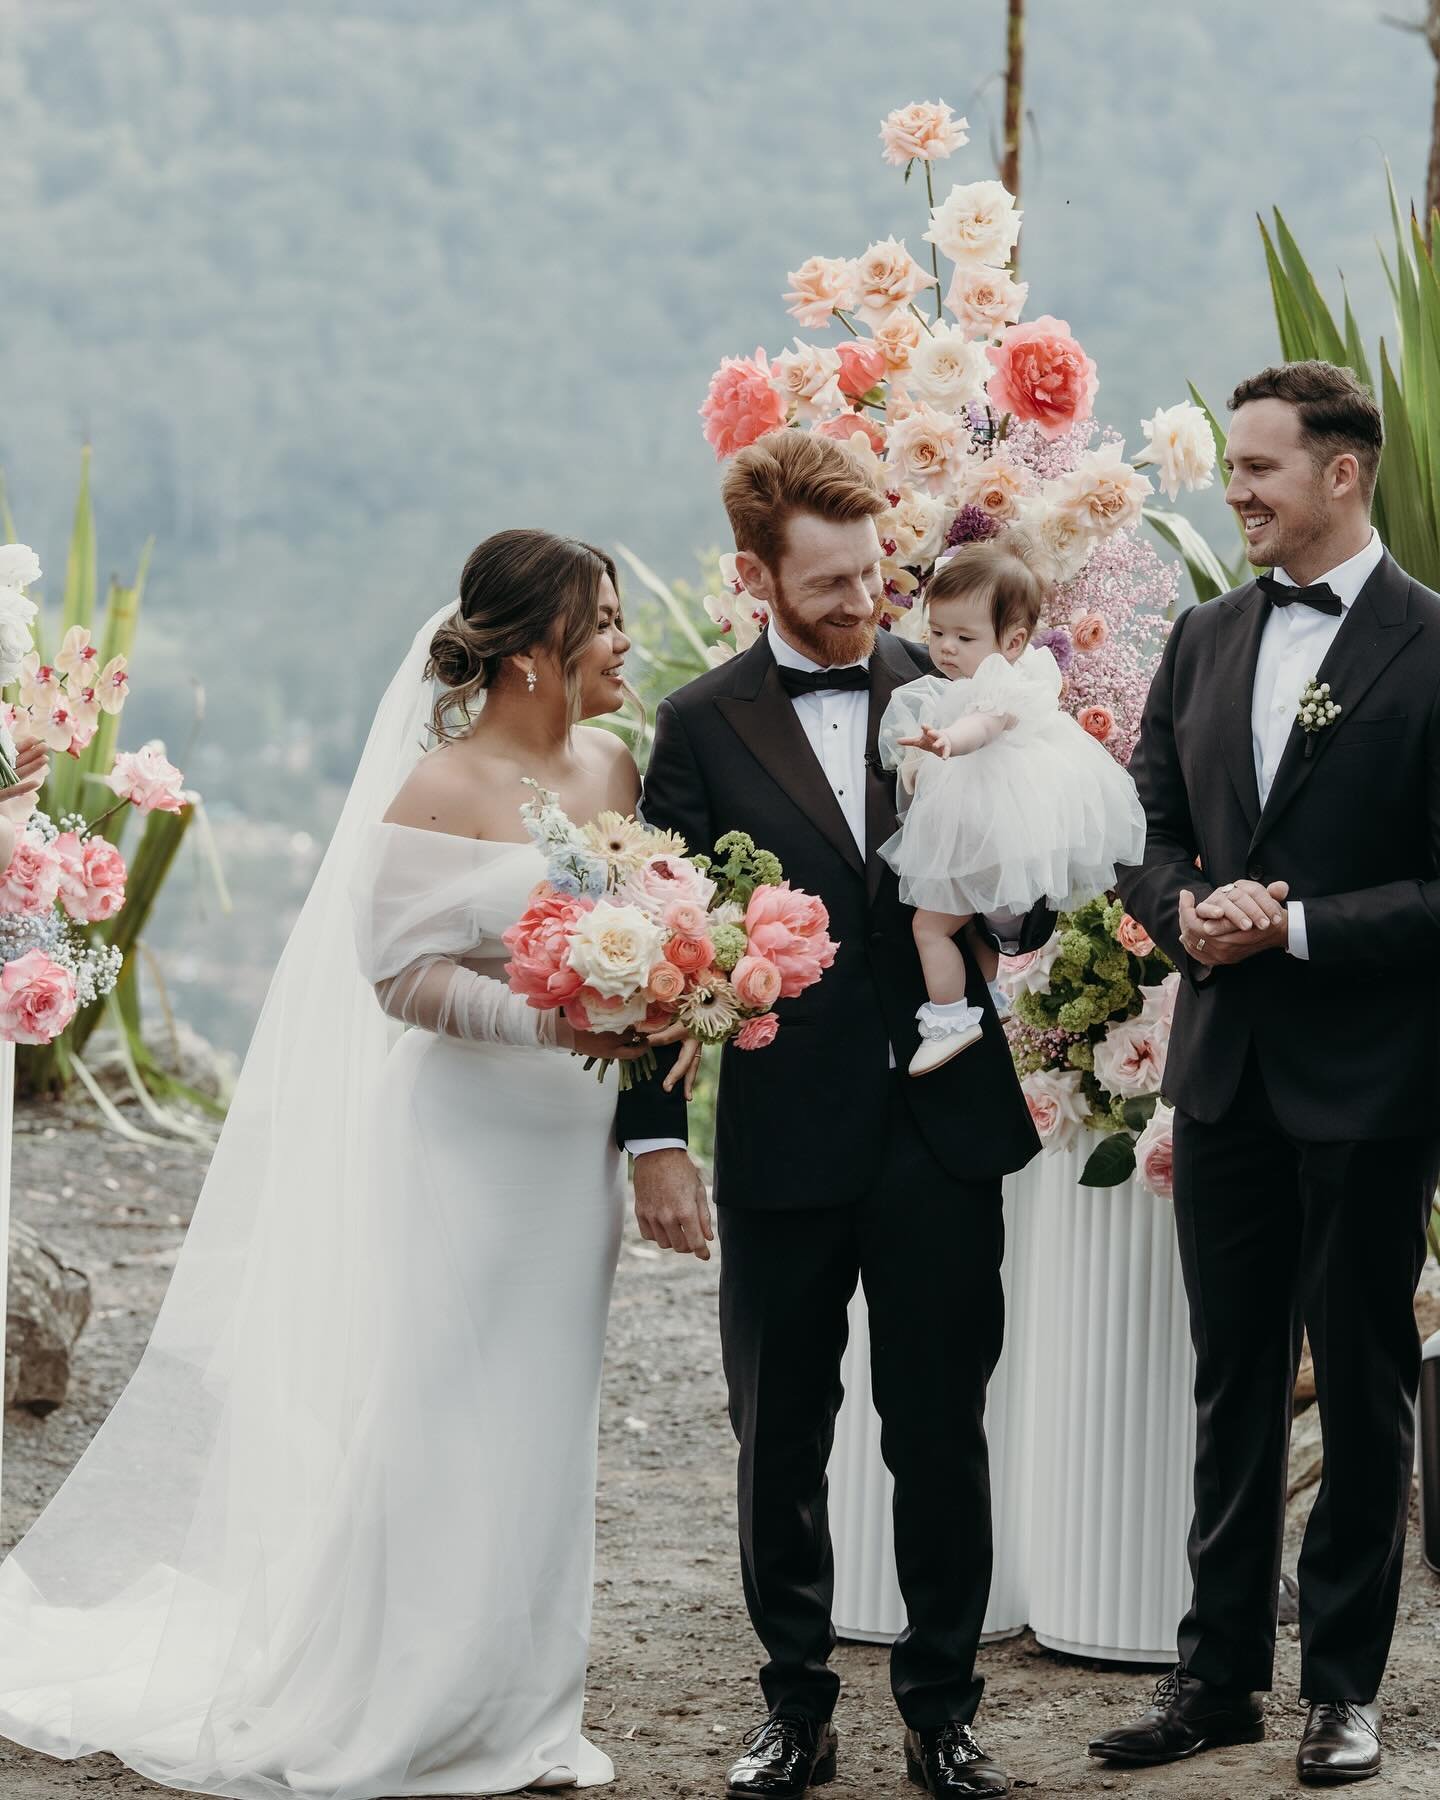 Annaly &amp; Tyron ~ &amp; their beautiful baby Sadie (who almost stole the show 🥰 )

Married at the wow location that is @glenworthvalleyweddings (check out the view in that first photo, once you&rsquo;ve oohed and aahed at Sadie, her folks, the fl